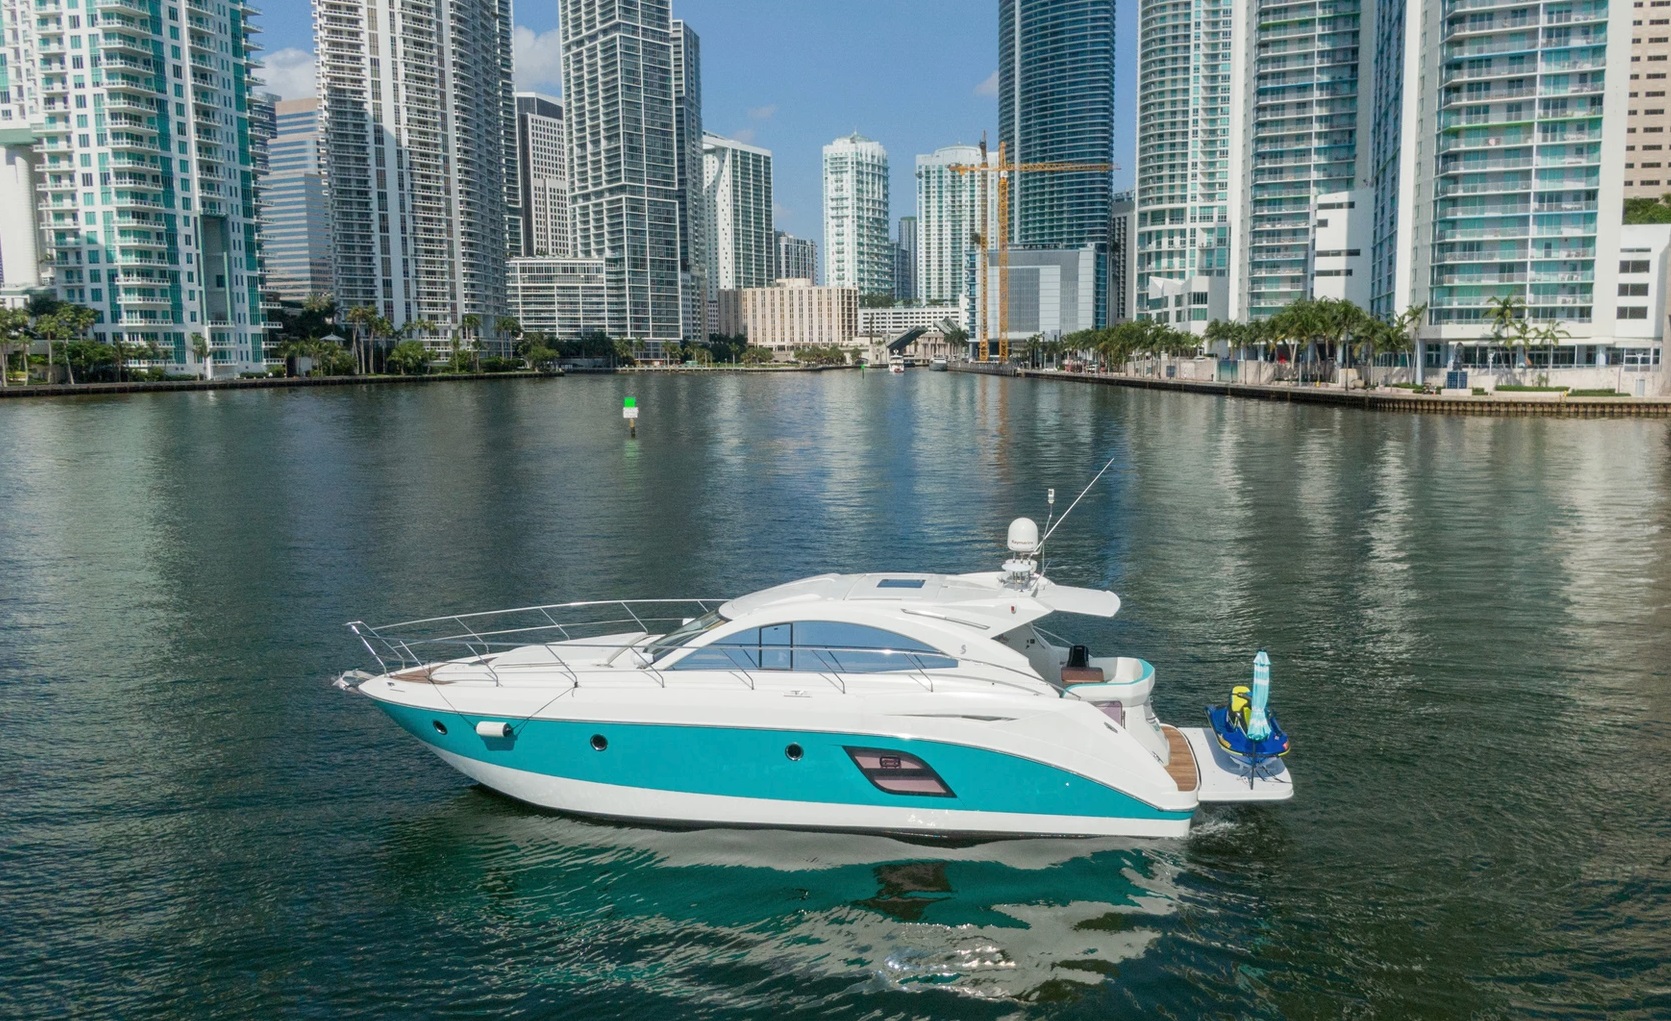 54 Things to Do in Miami, Florida for Cruise Passengers